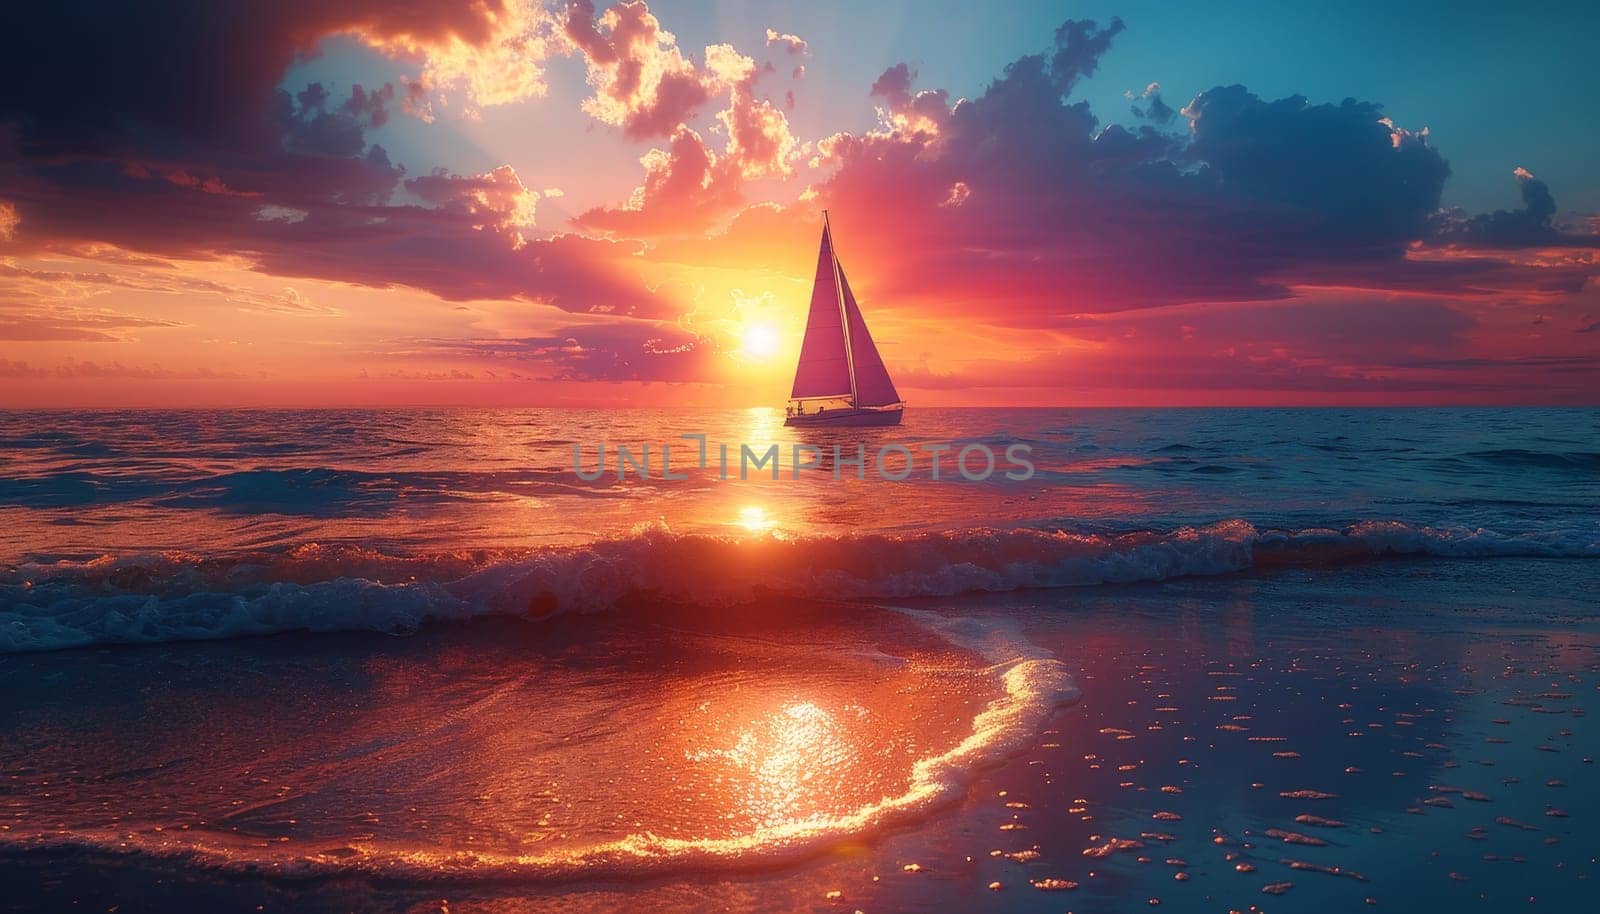 A sailboat is sailing on a beautiful, colorful ocean at sunset by nateemee